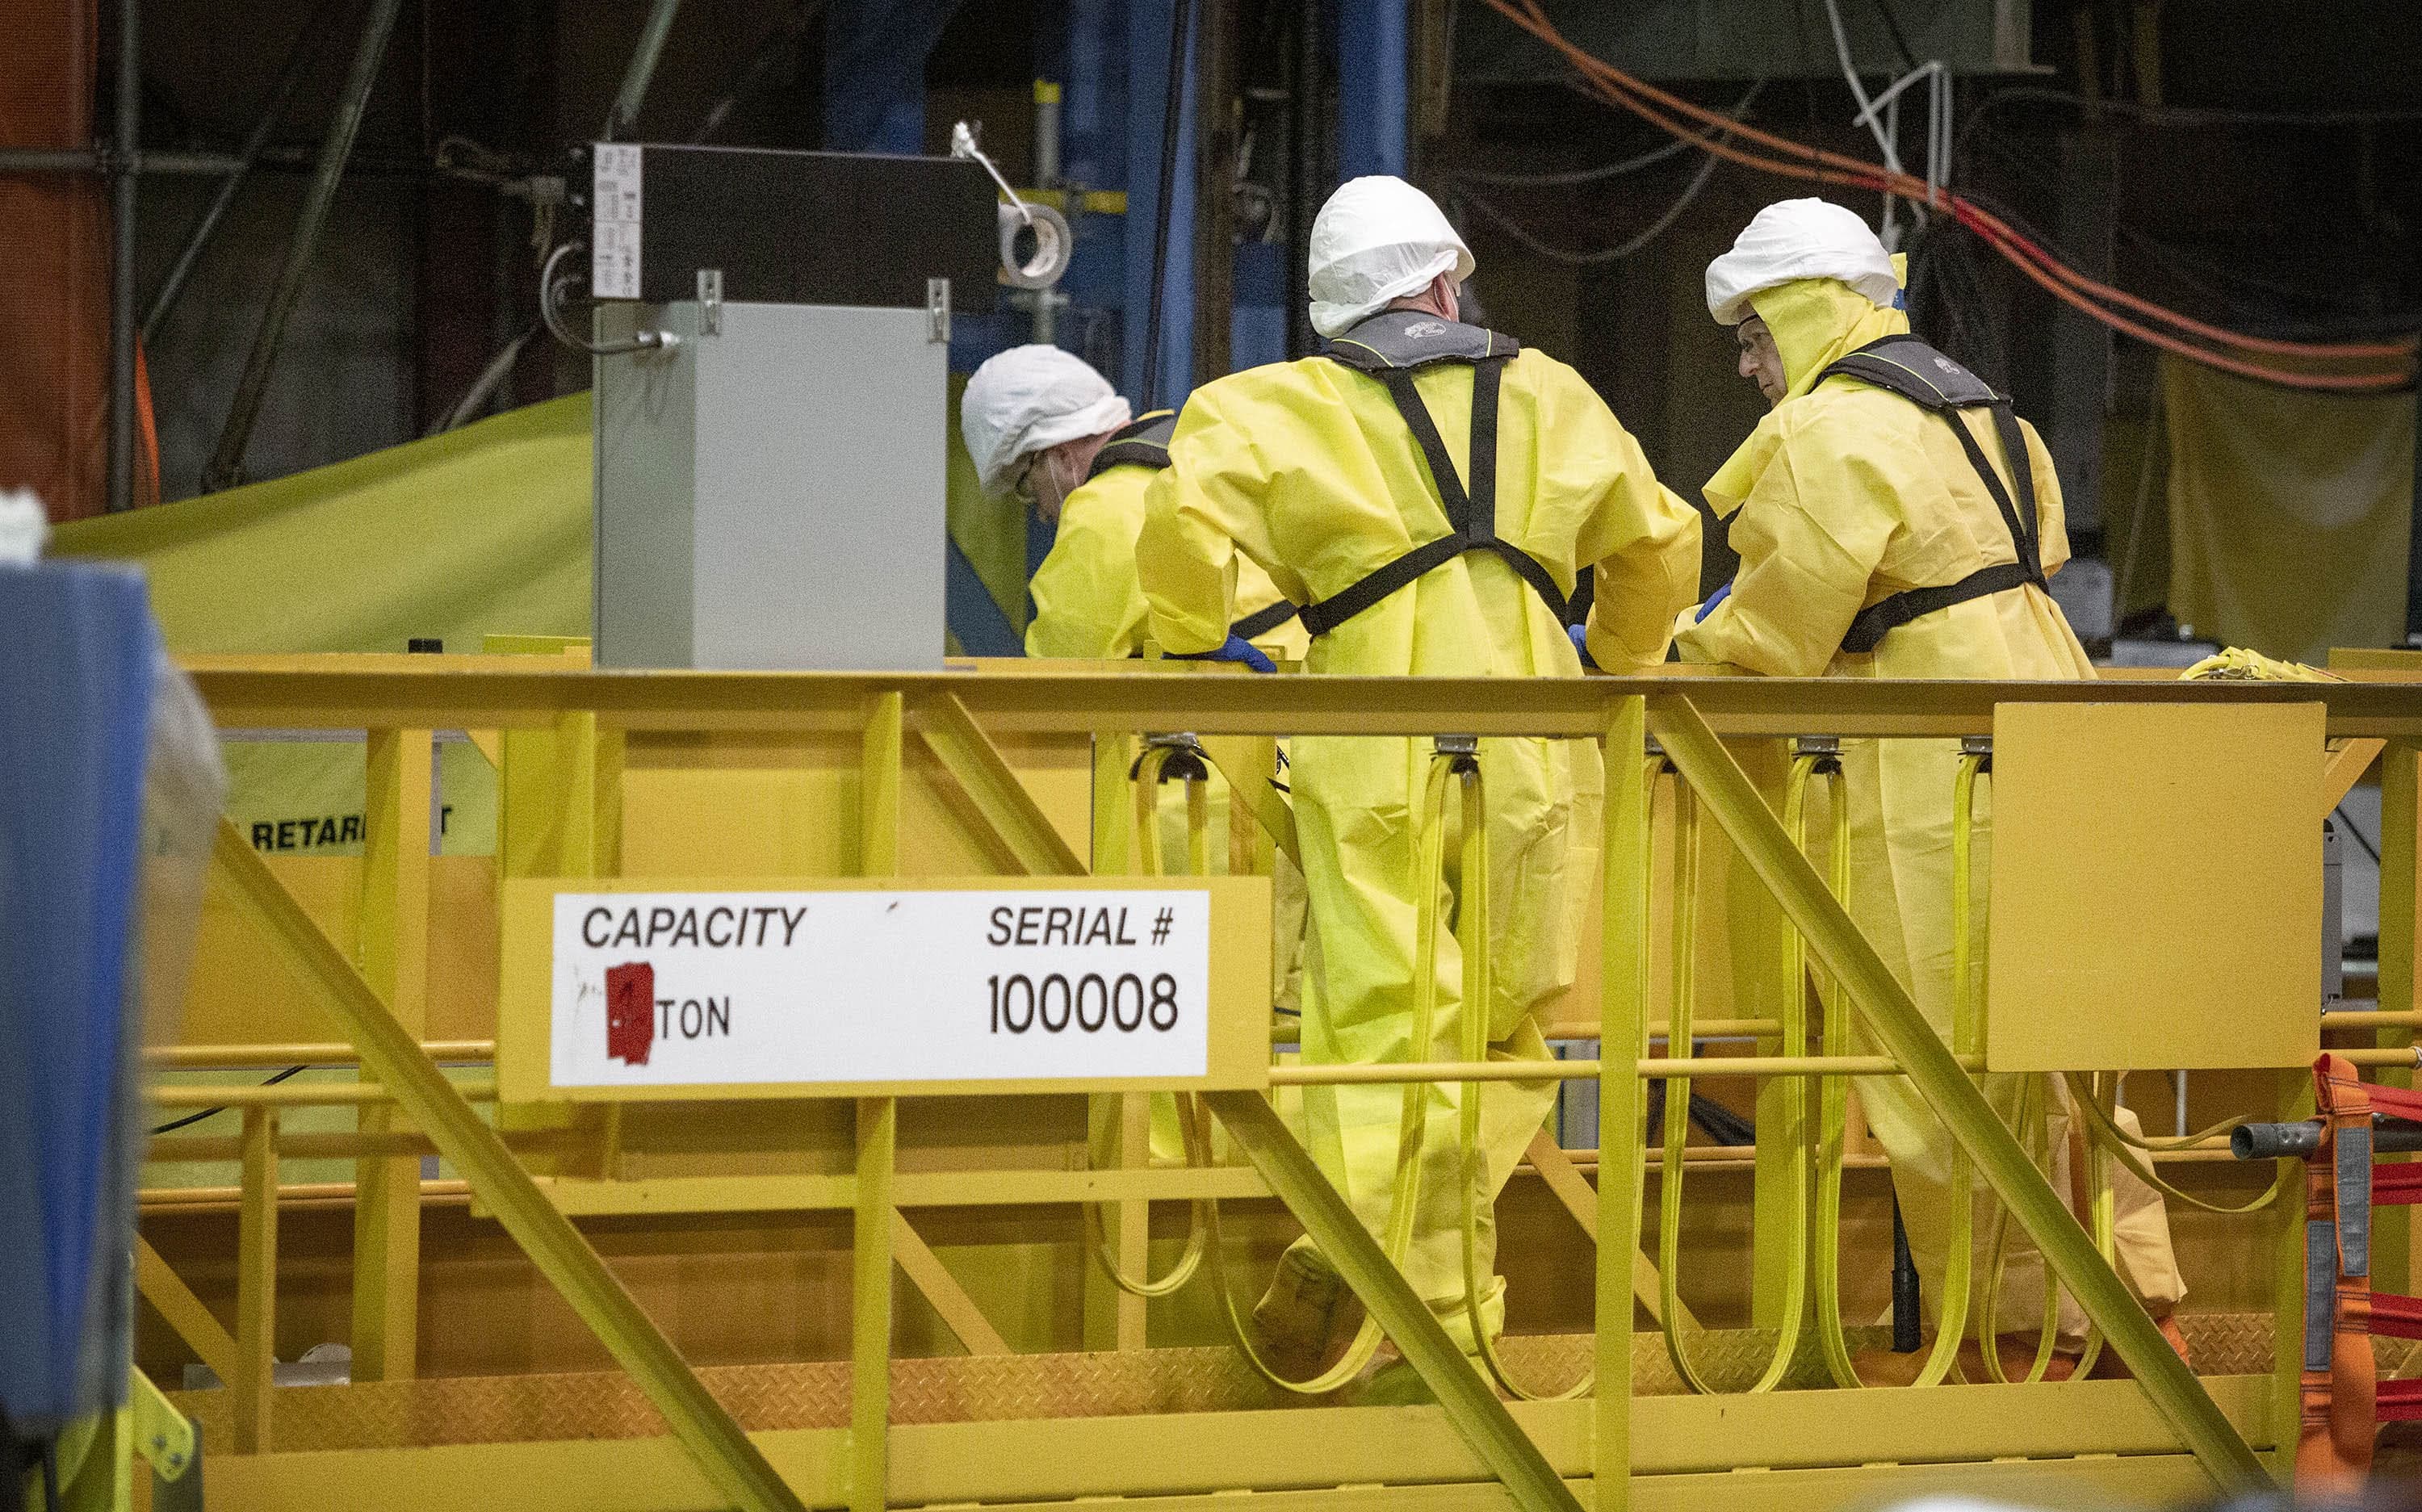 A decommissioning crew works on dismantling the plant at Pilgrim Nuclear Power Station. (Robin Lubbock/WBUR)